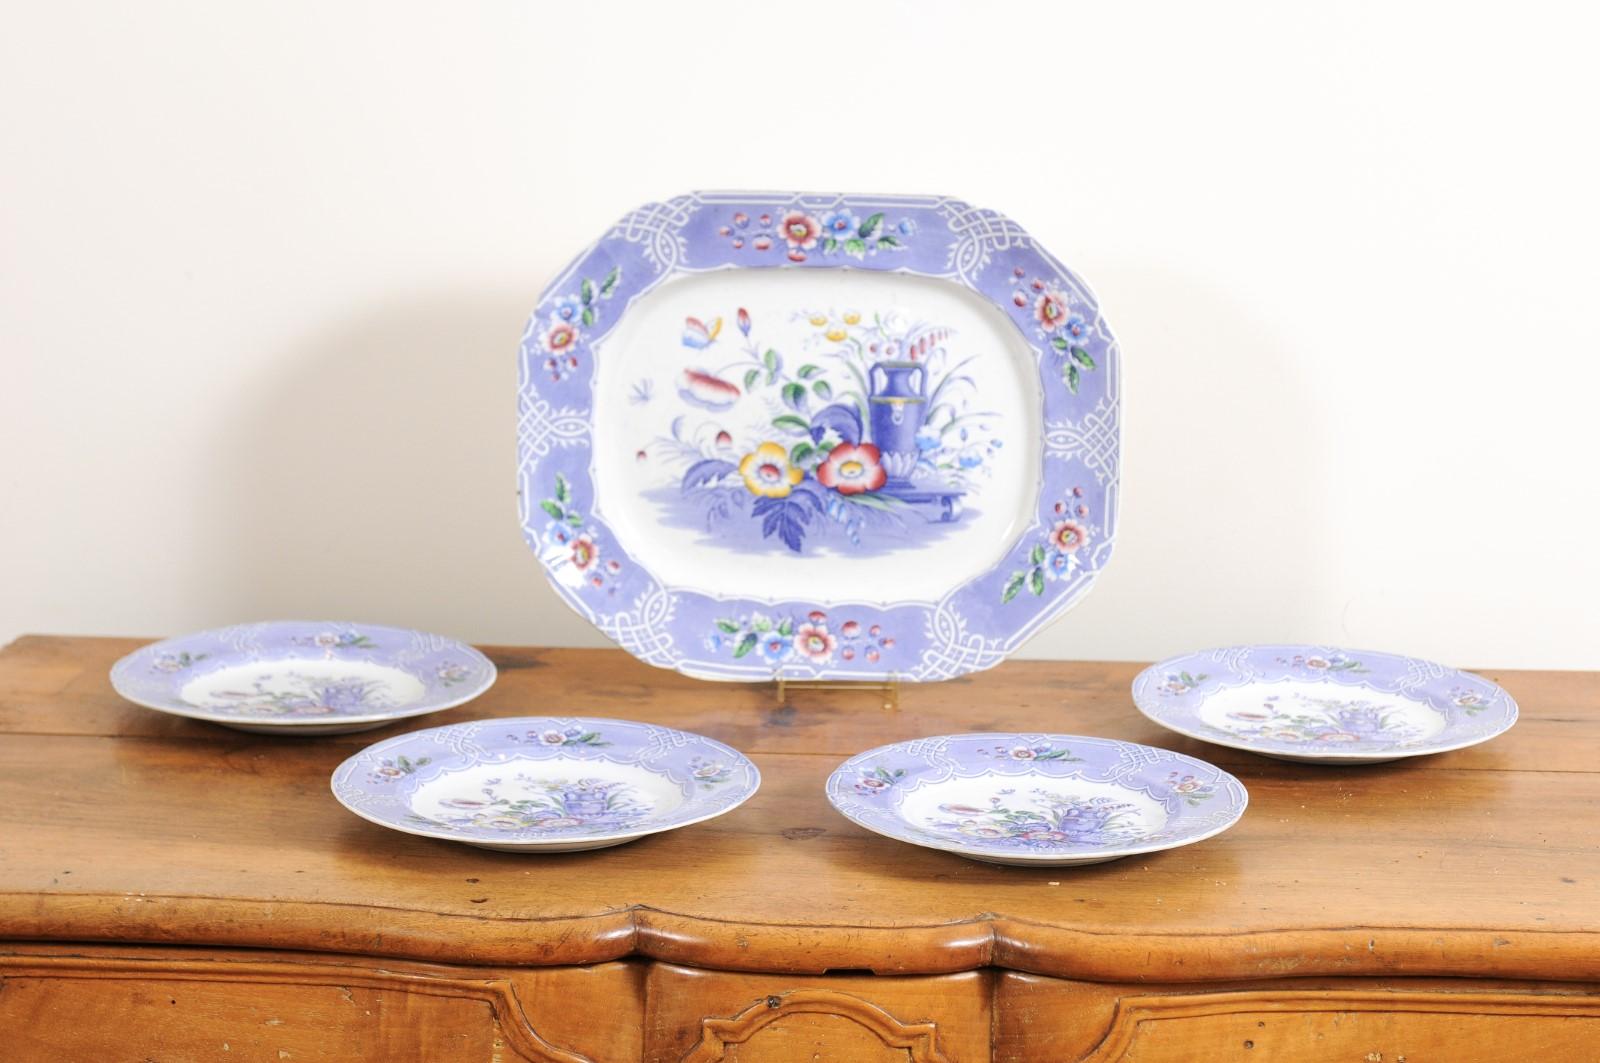 A set of five English ironstone dishes from the 19th century, with rare floral pattern. Created during the 19th century, this set of five ironstone dishes features four plates (each measuring 10